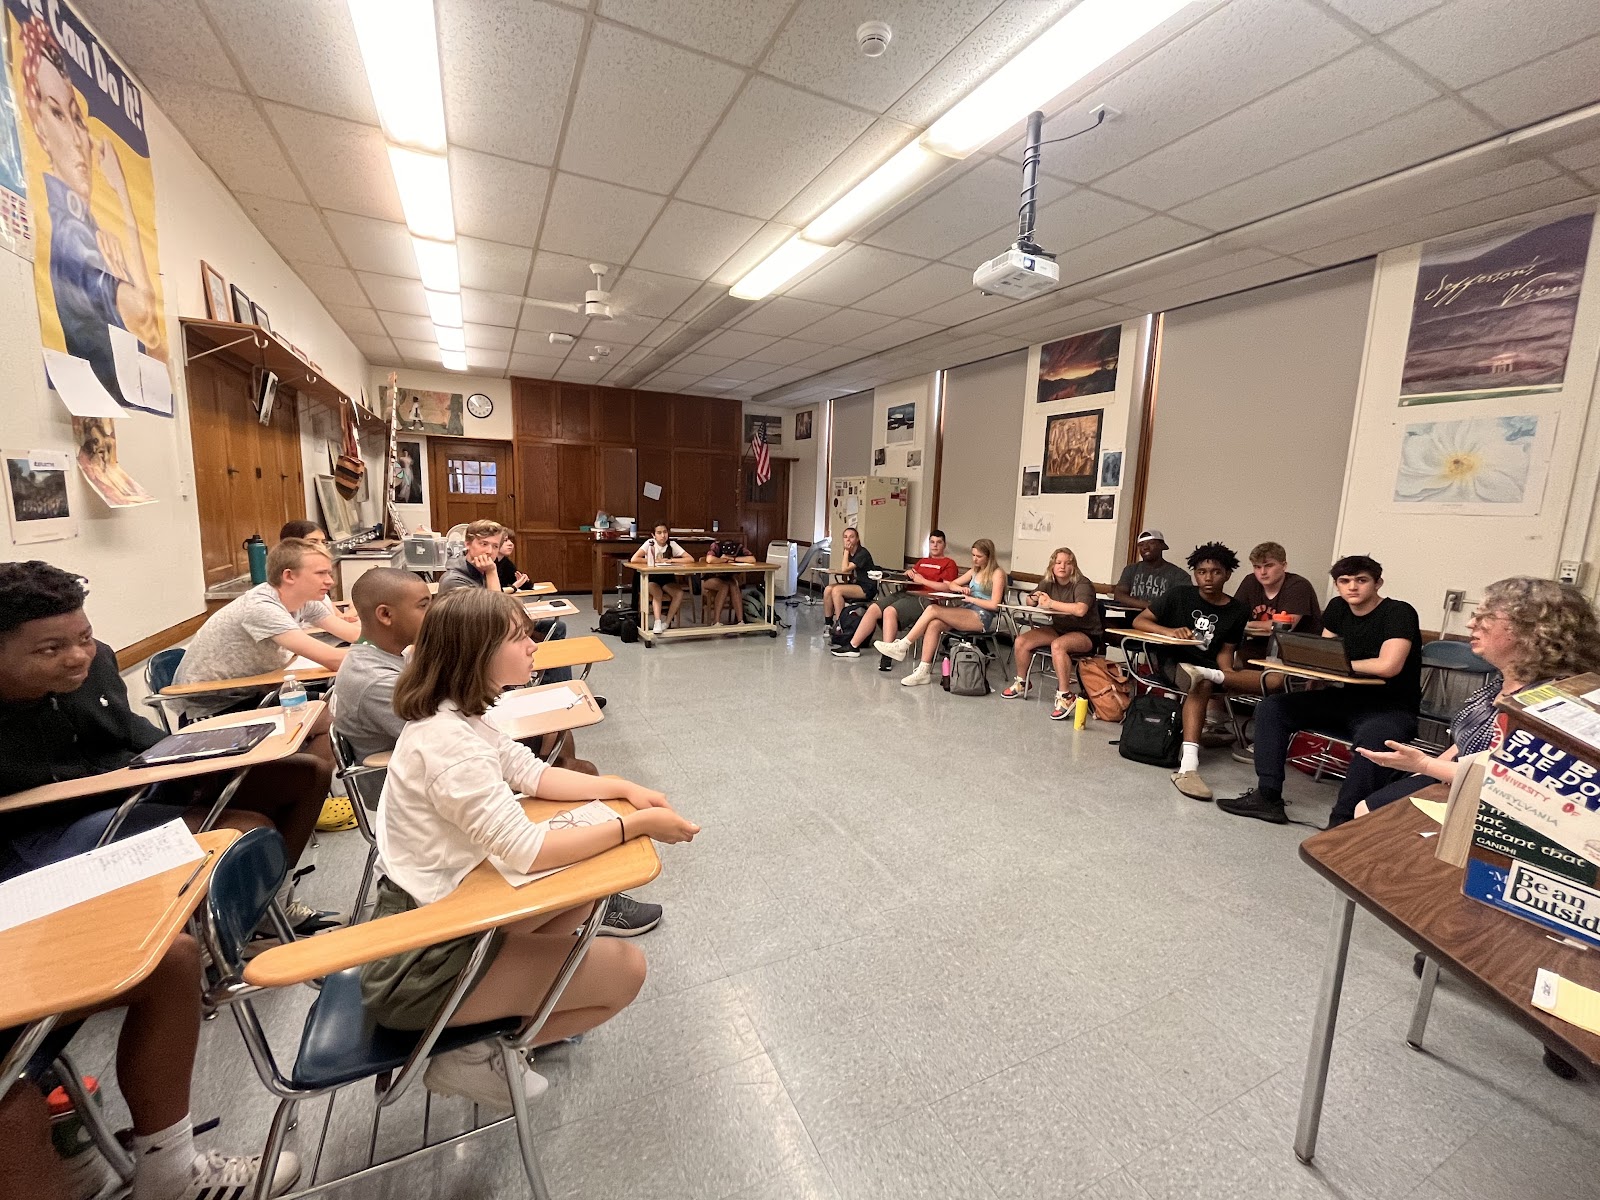 AP U.S. History teacher Sarah Davis and her third-period class discuss the film “Dr.Strangelove” in Room 302 June 2. Students took the APUSH exam May 5. According to Davis, students who navigate the course gain skills that can help them succeed in college and beyond. Students can get help in study circles and during conference periods, which occur Wednesdays and Fridays from 3-4 p.m.